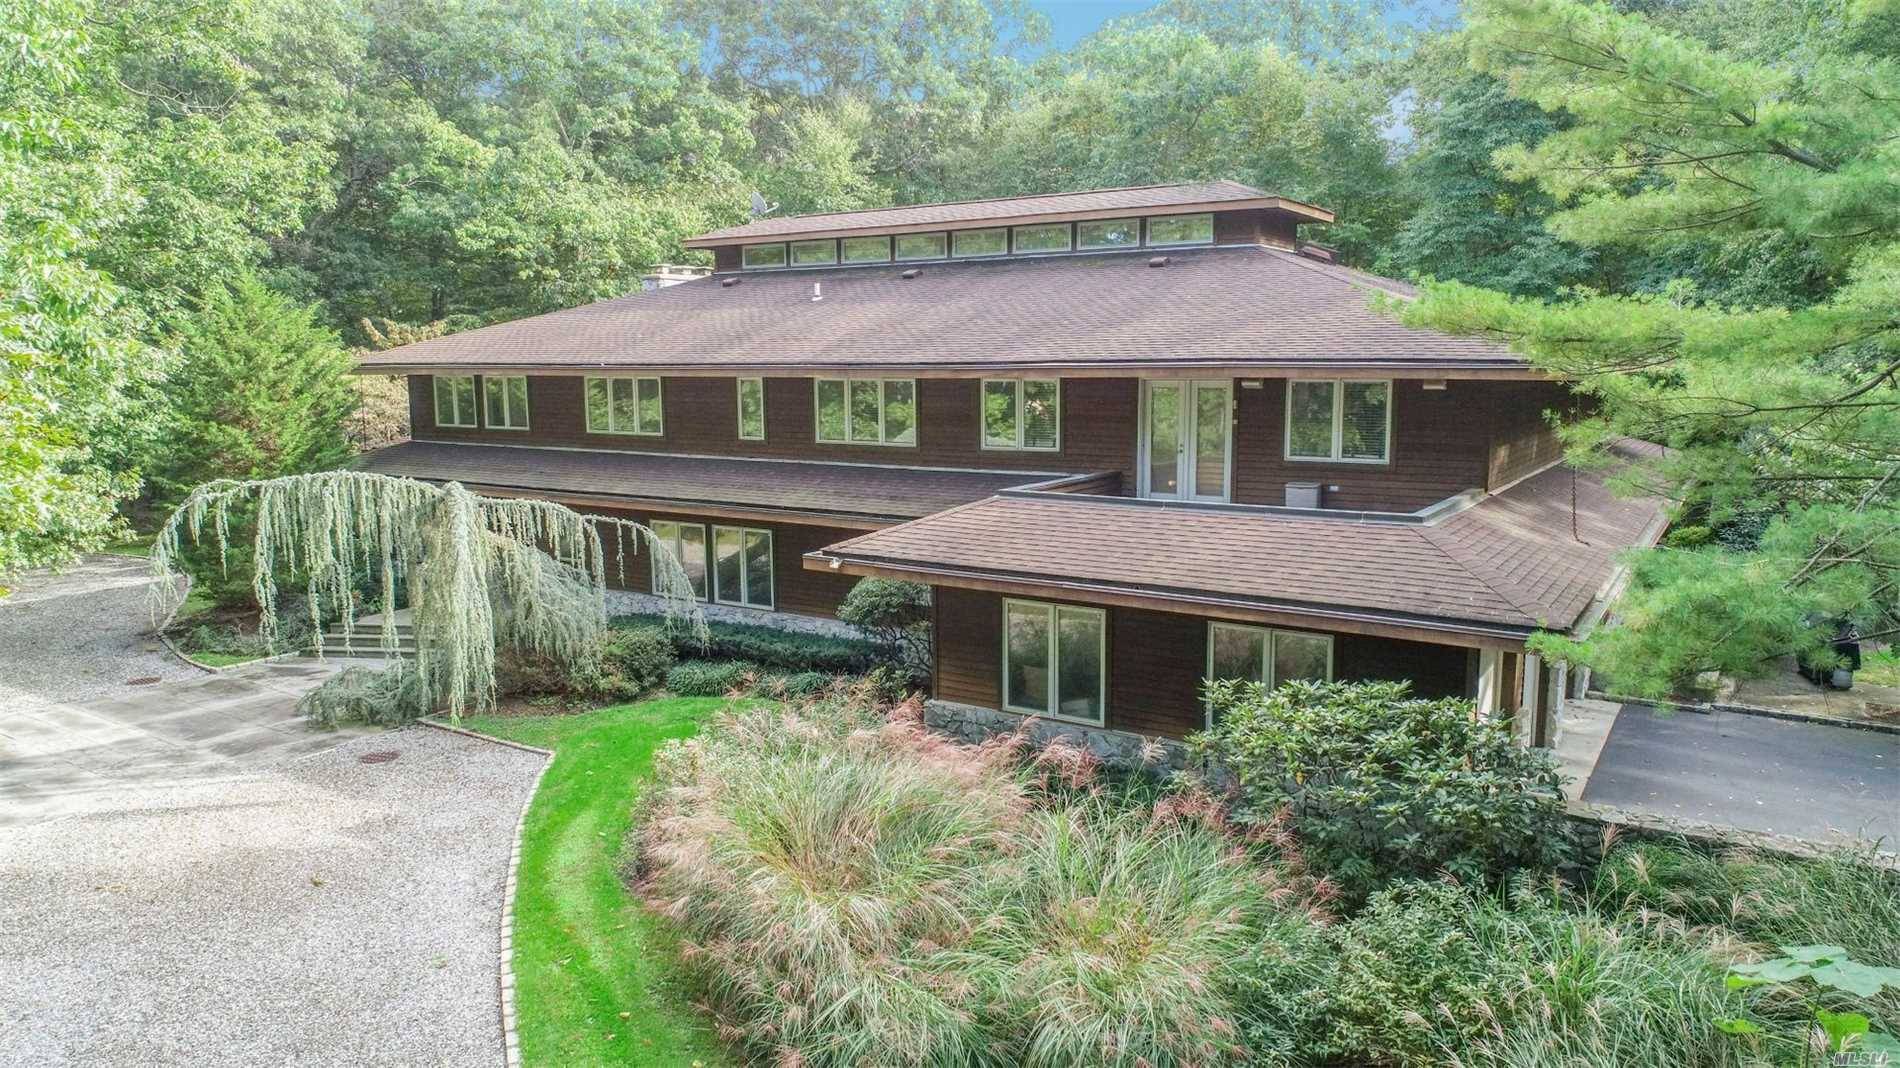 This Frank Lloyd Wright Inspired Residence w 6200 sq ft.